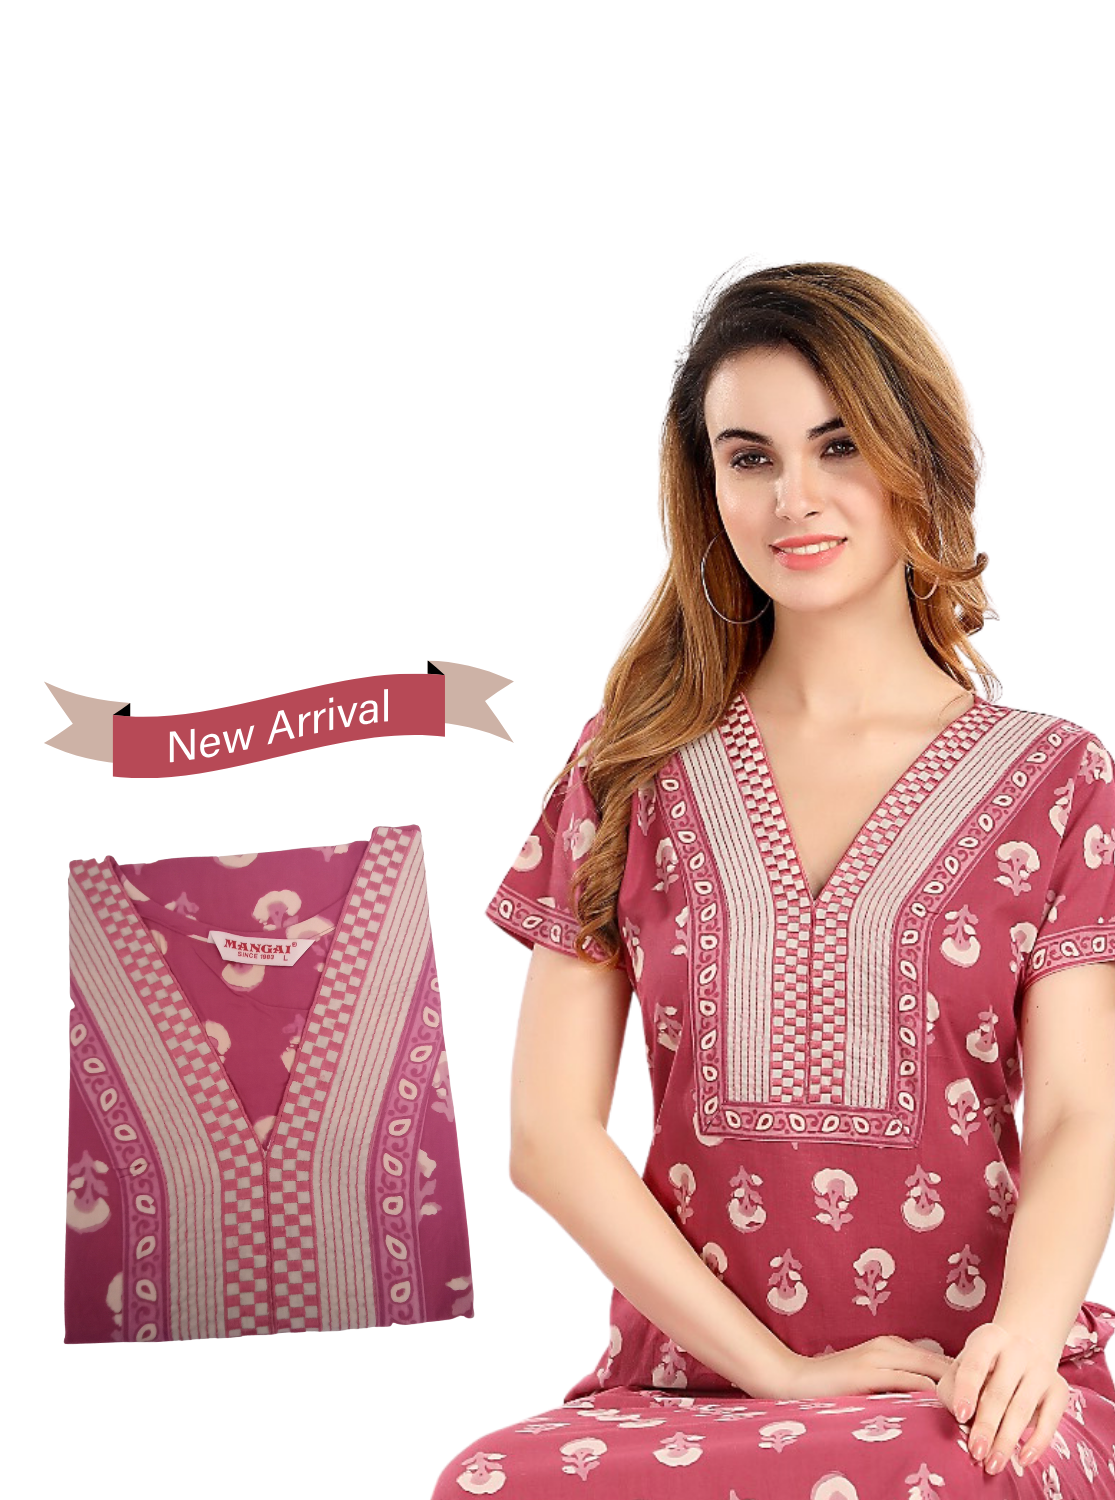 New Arrivals MANGAI New Cotton Printed Nighties- All Over Printed Stylish Nightwear for Stylish Women | Beautiful Nighties for Stylish Women's